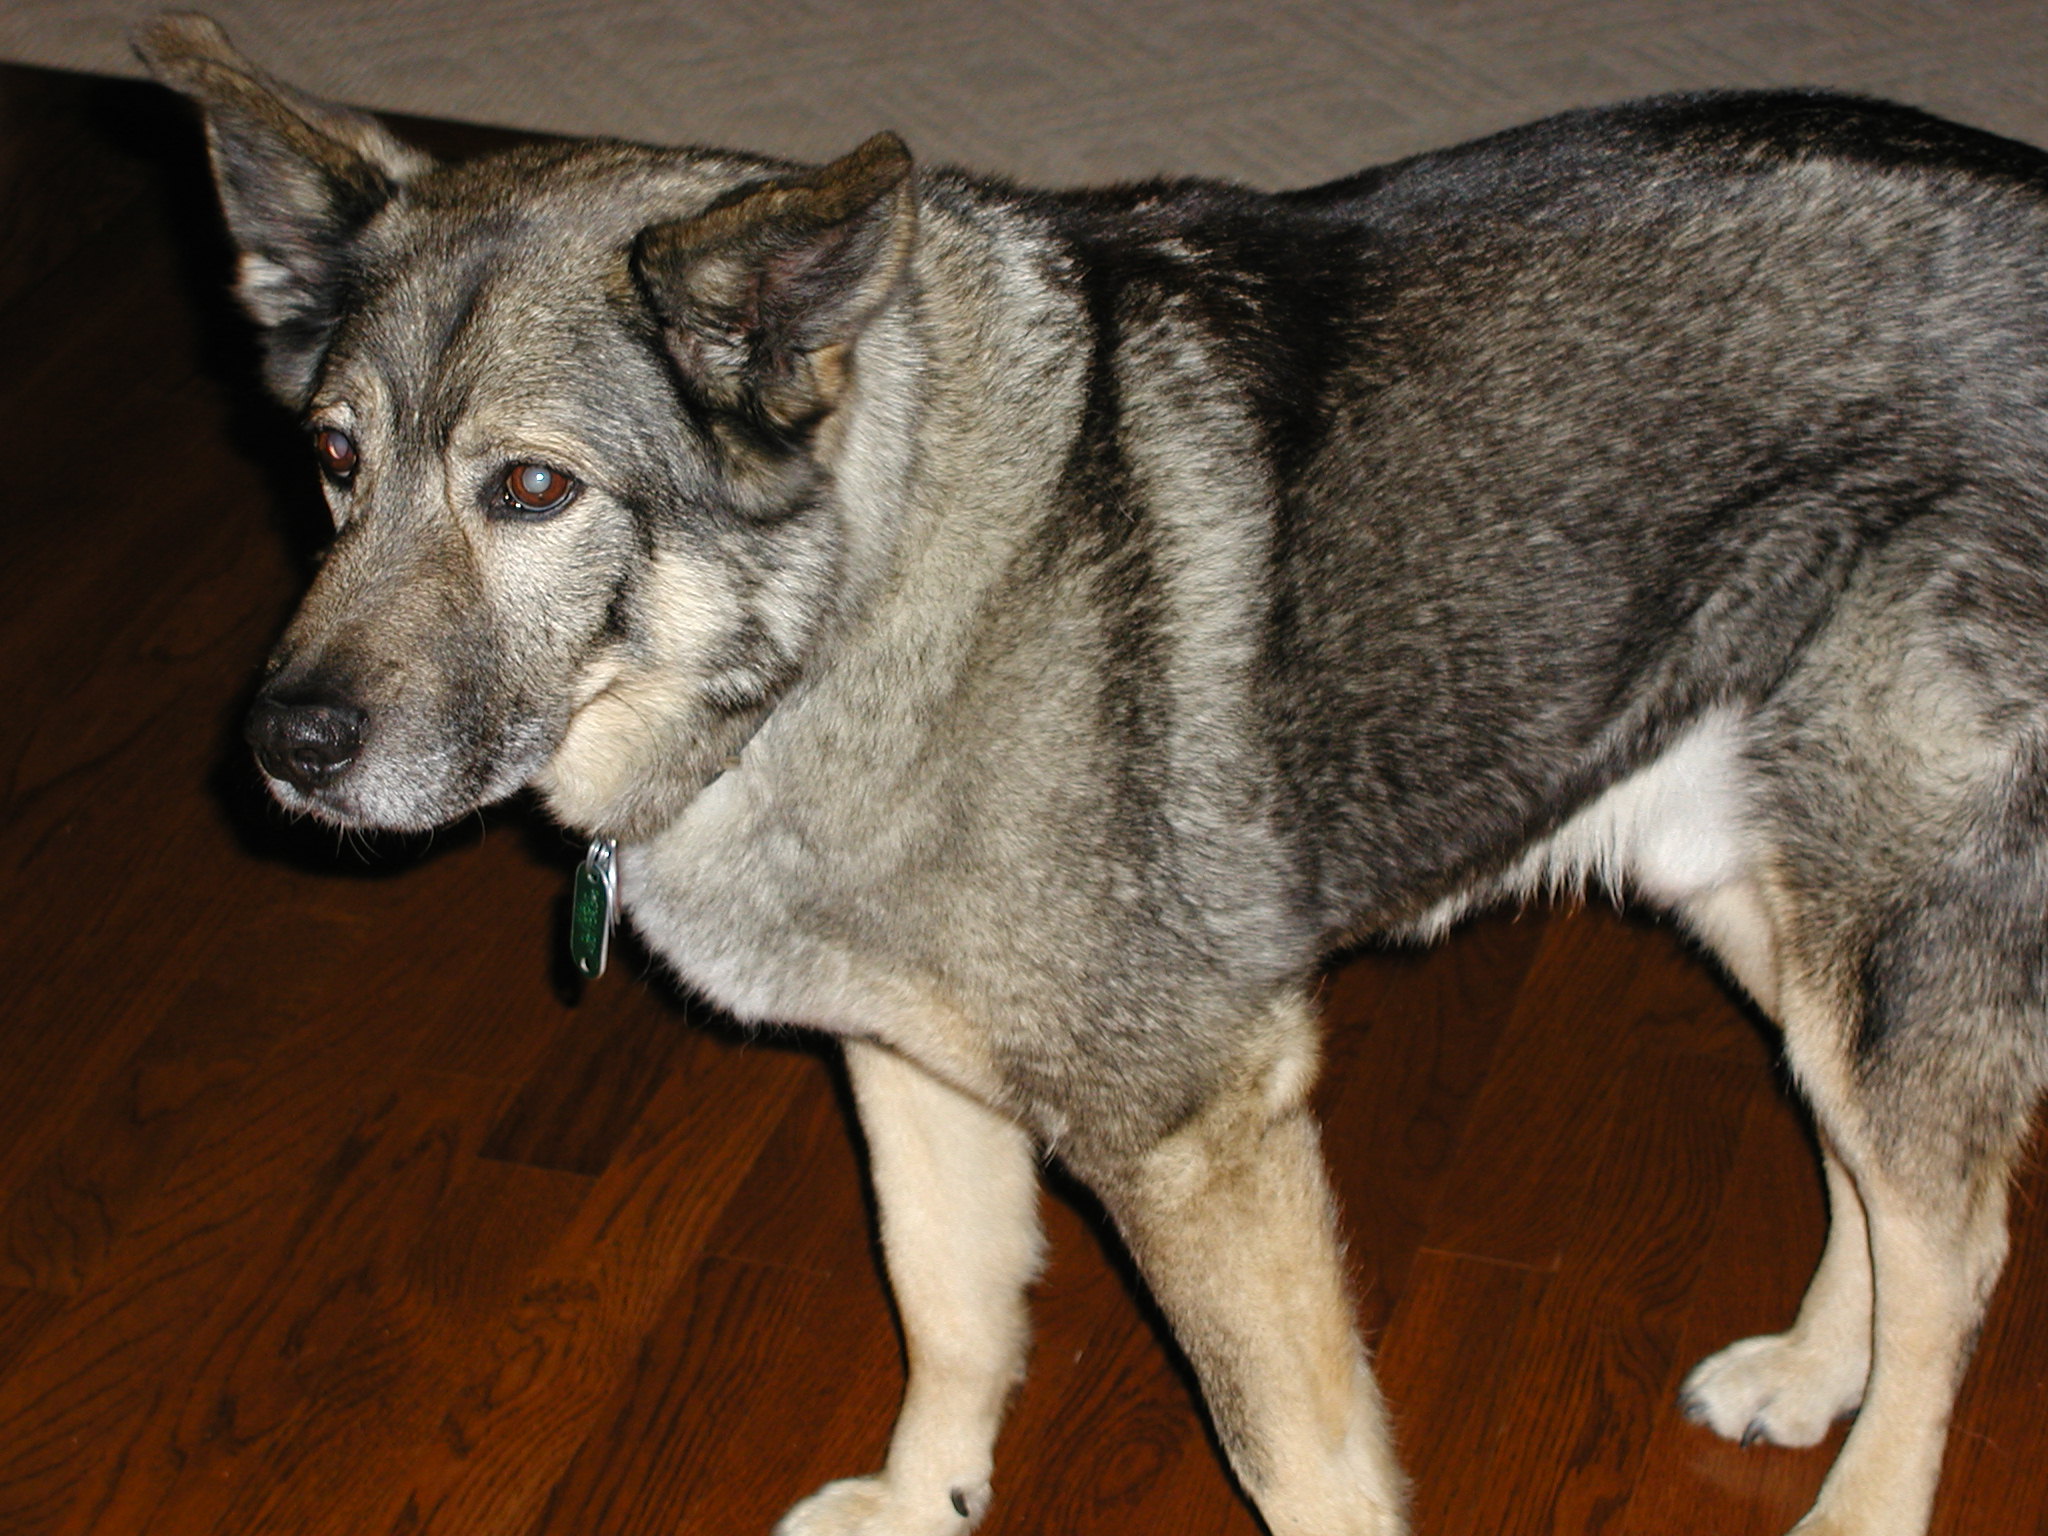 A picture of Pete the dog, a Norwegian Elkhound mix.